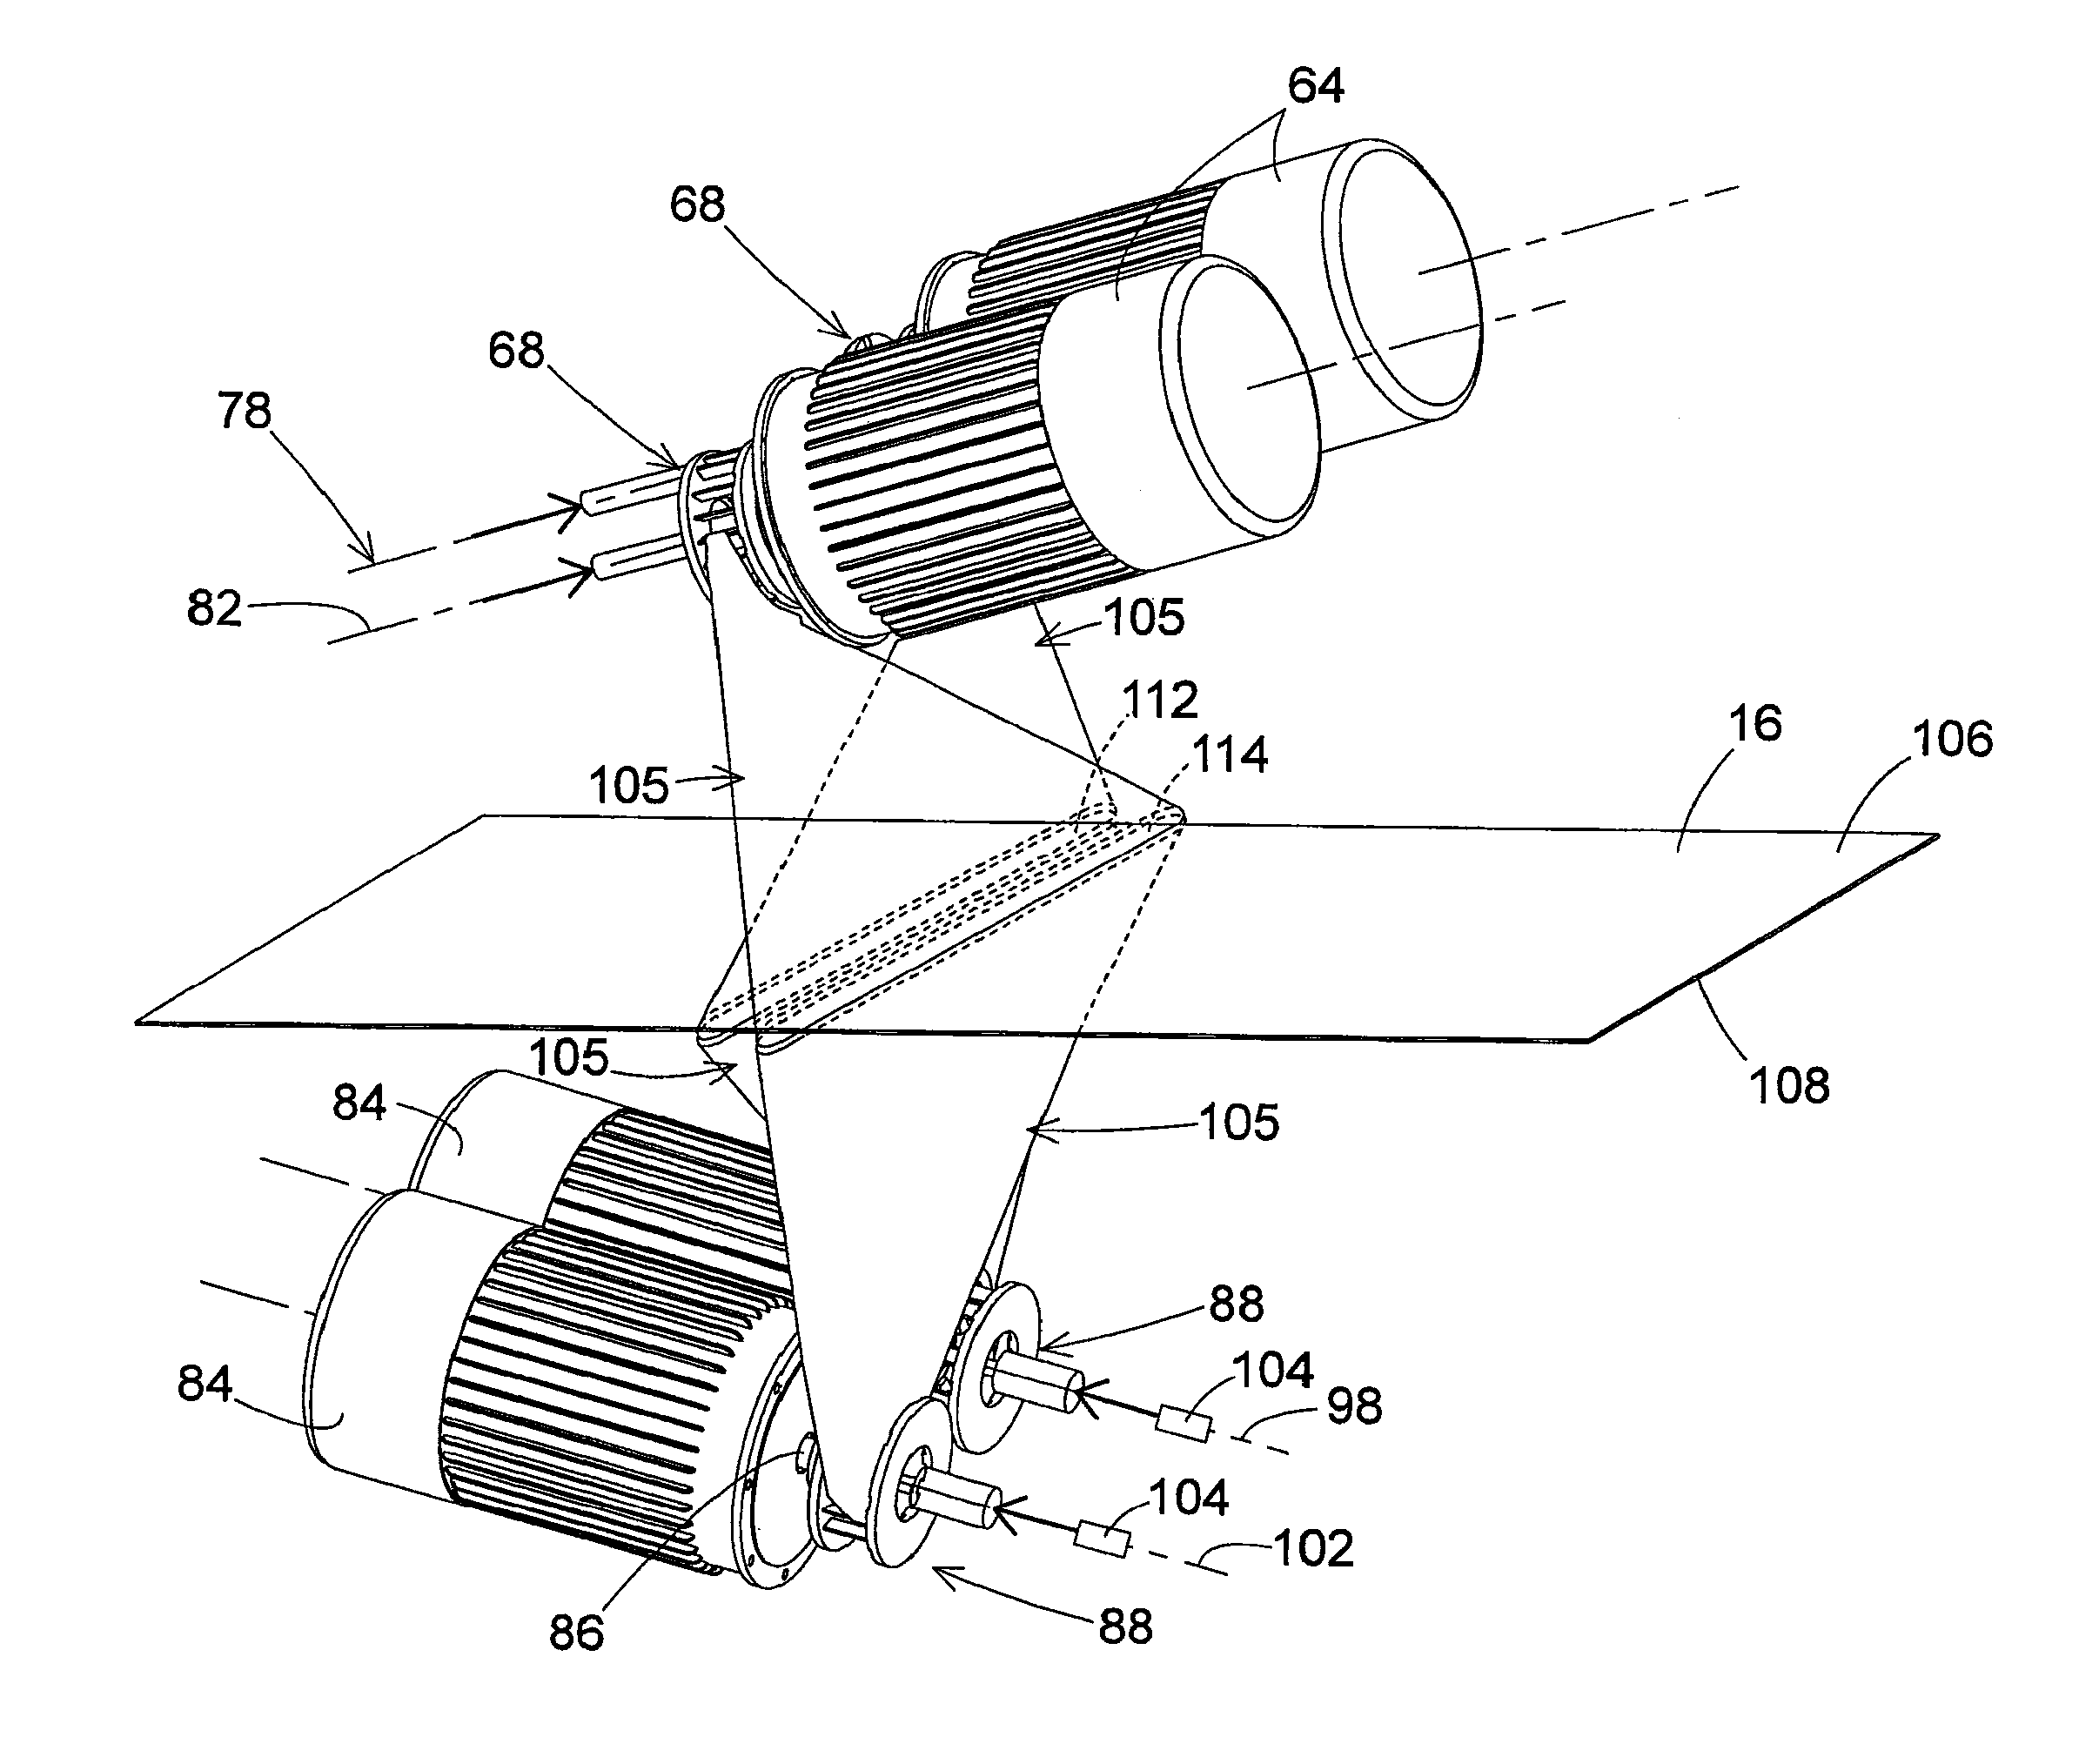 Method of producing rust inhibitive sheet metal through scale removal with a slurry blasting descaling cell